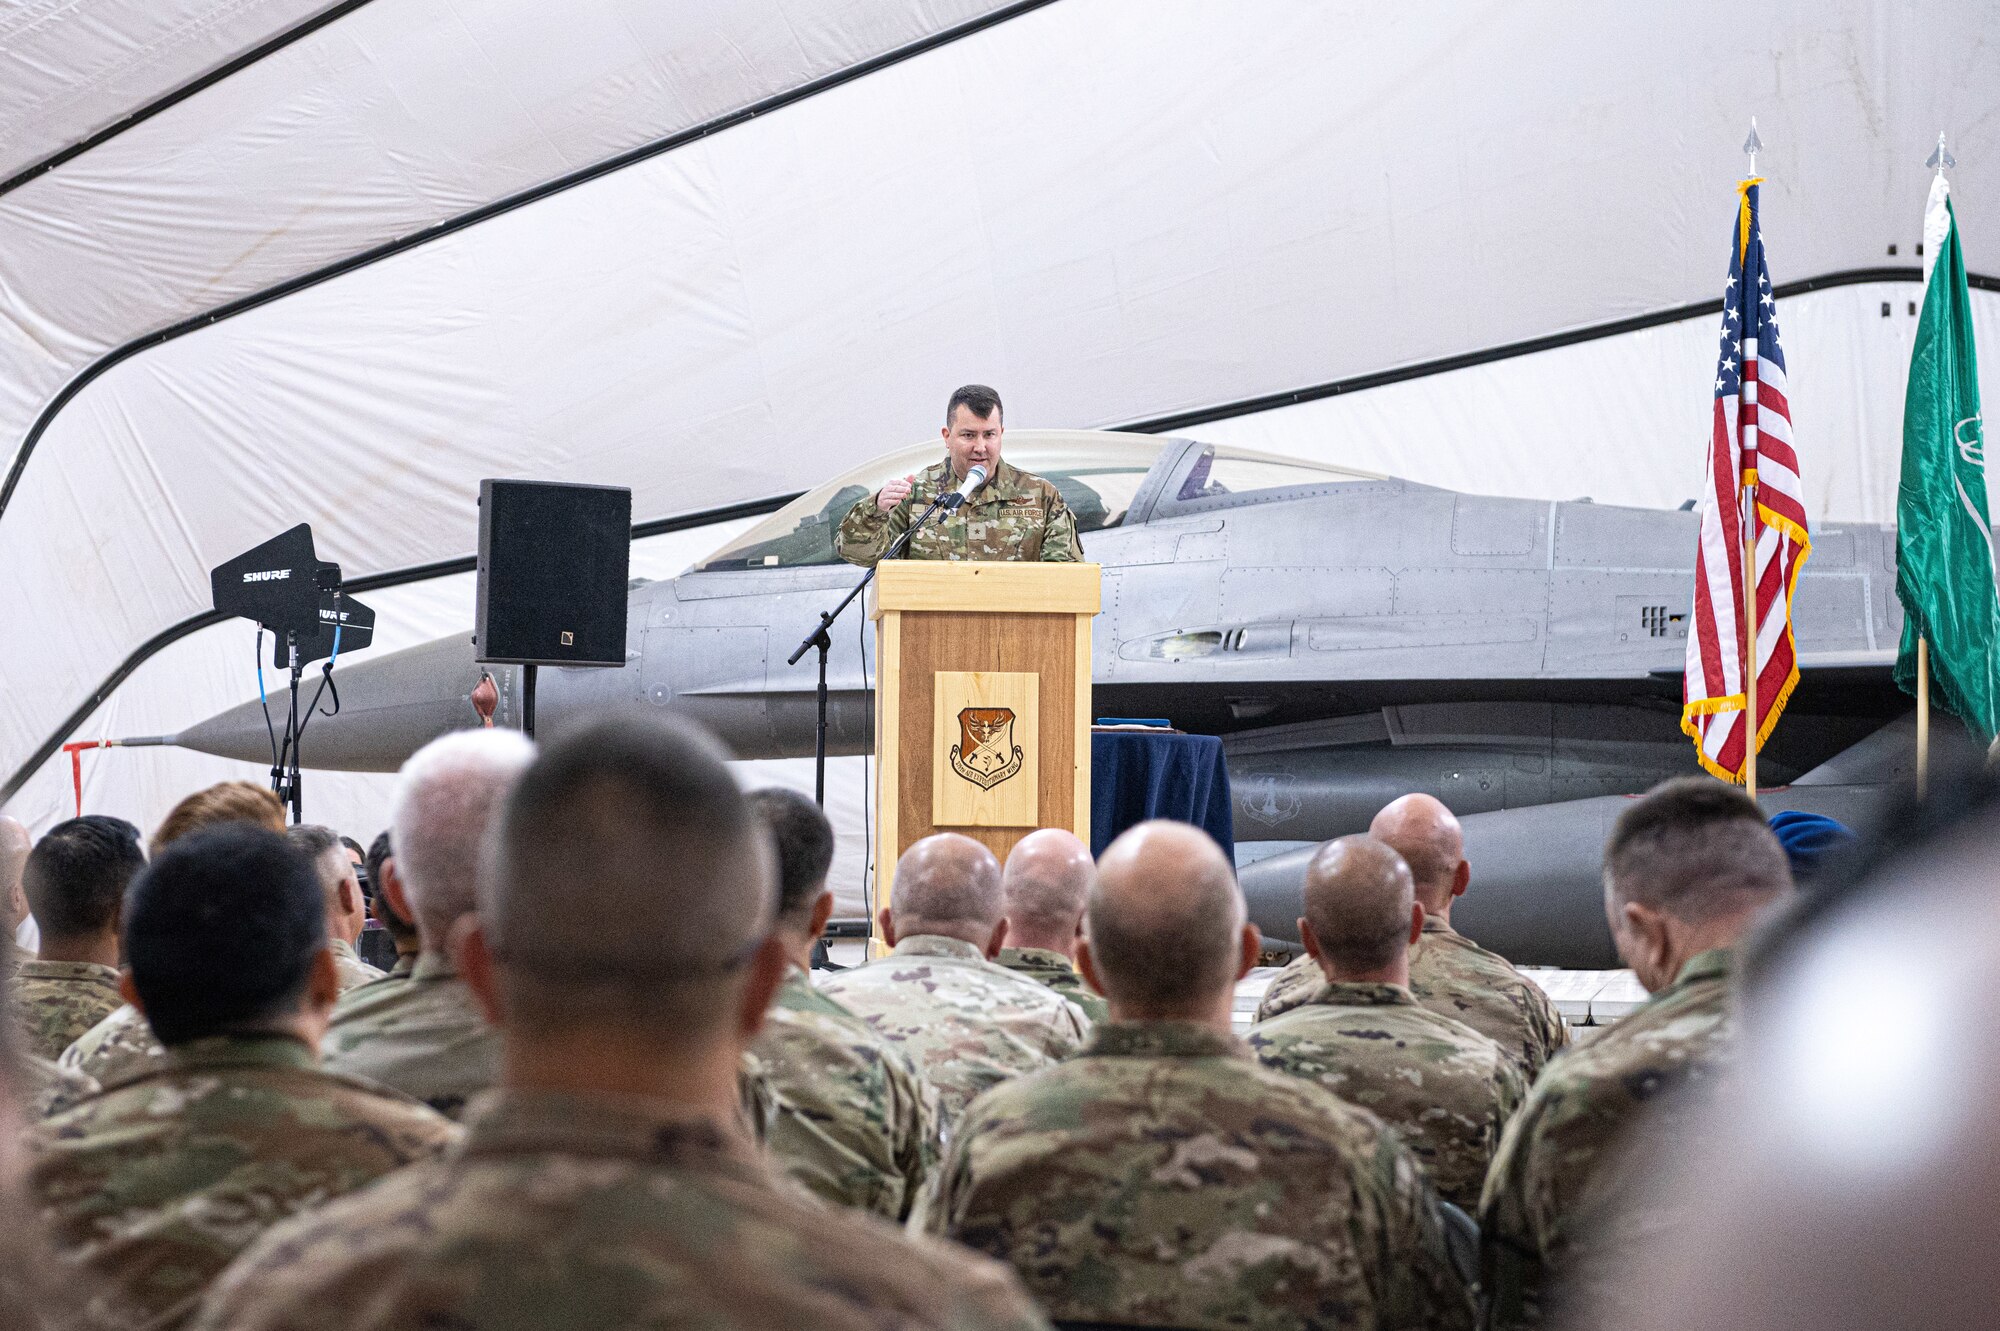 Vision for the future - a new commander takes the reins of the 378th AEW